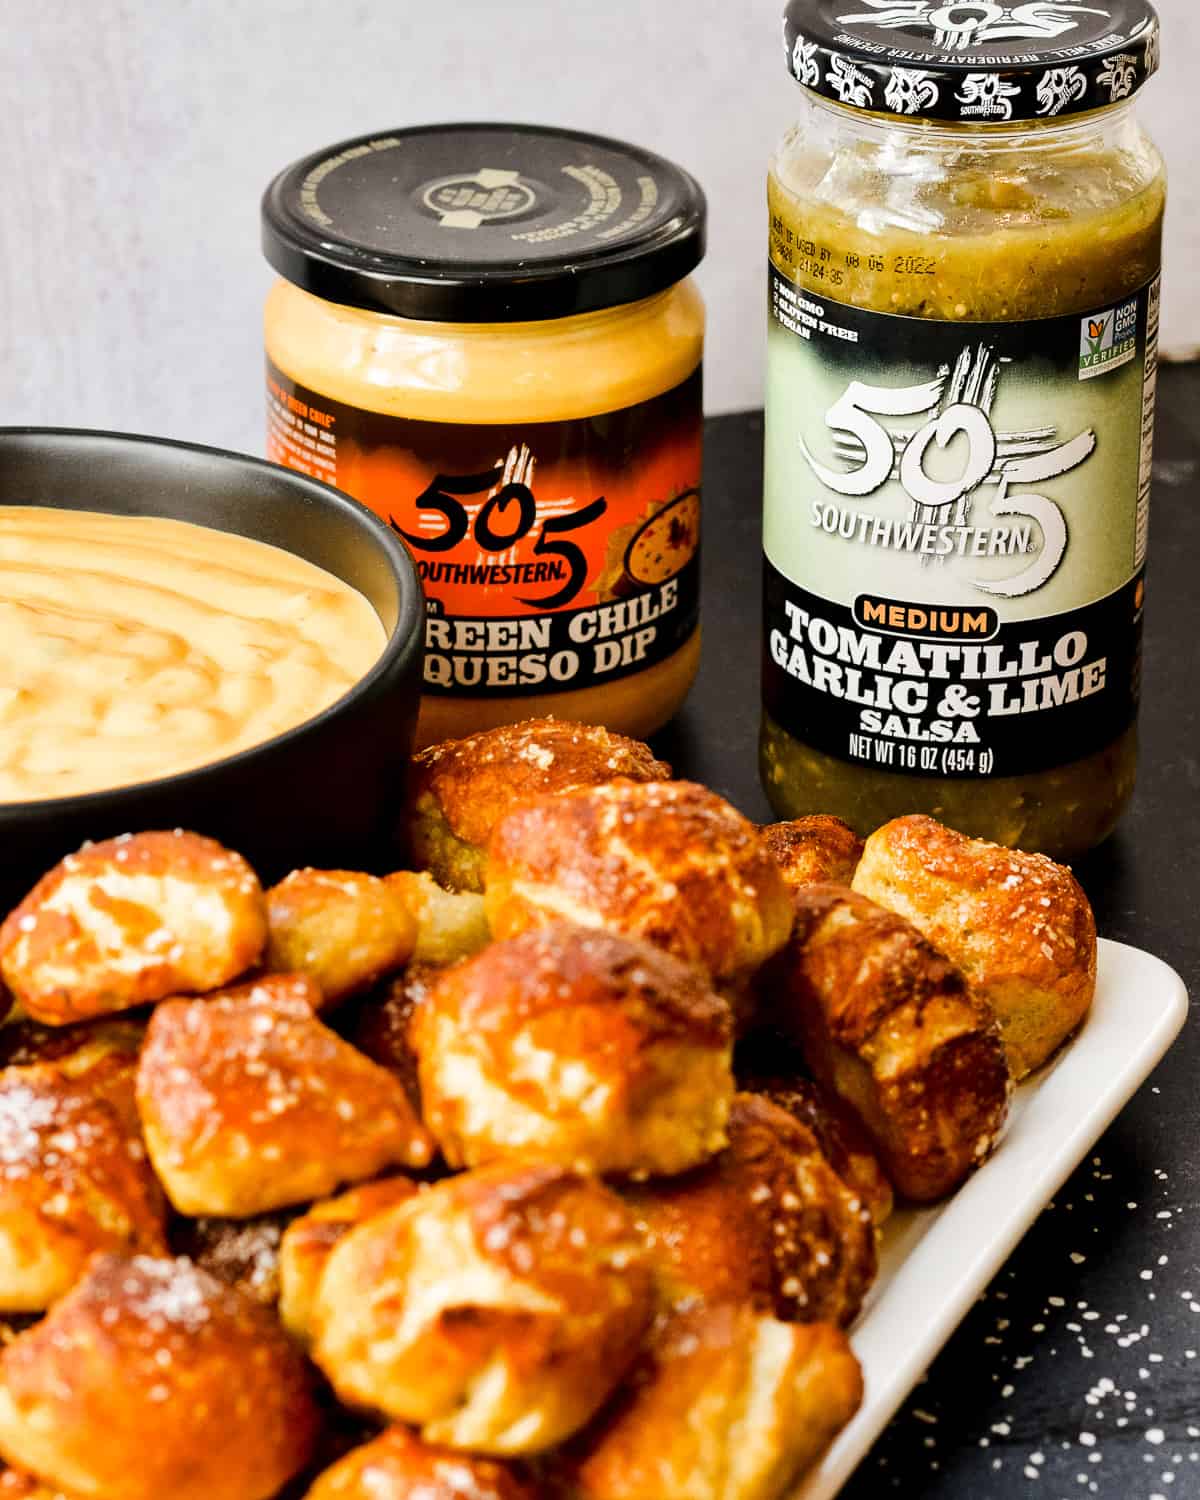 Pretzel bites with 505 southwestern tomatillo and queso jars in background.
